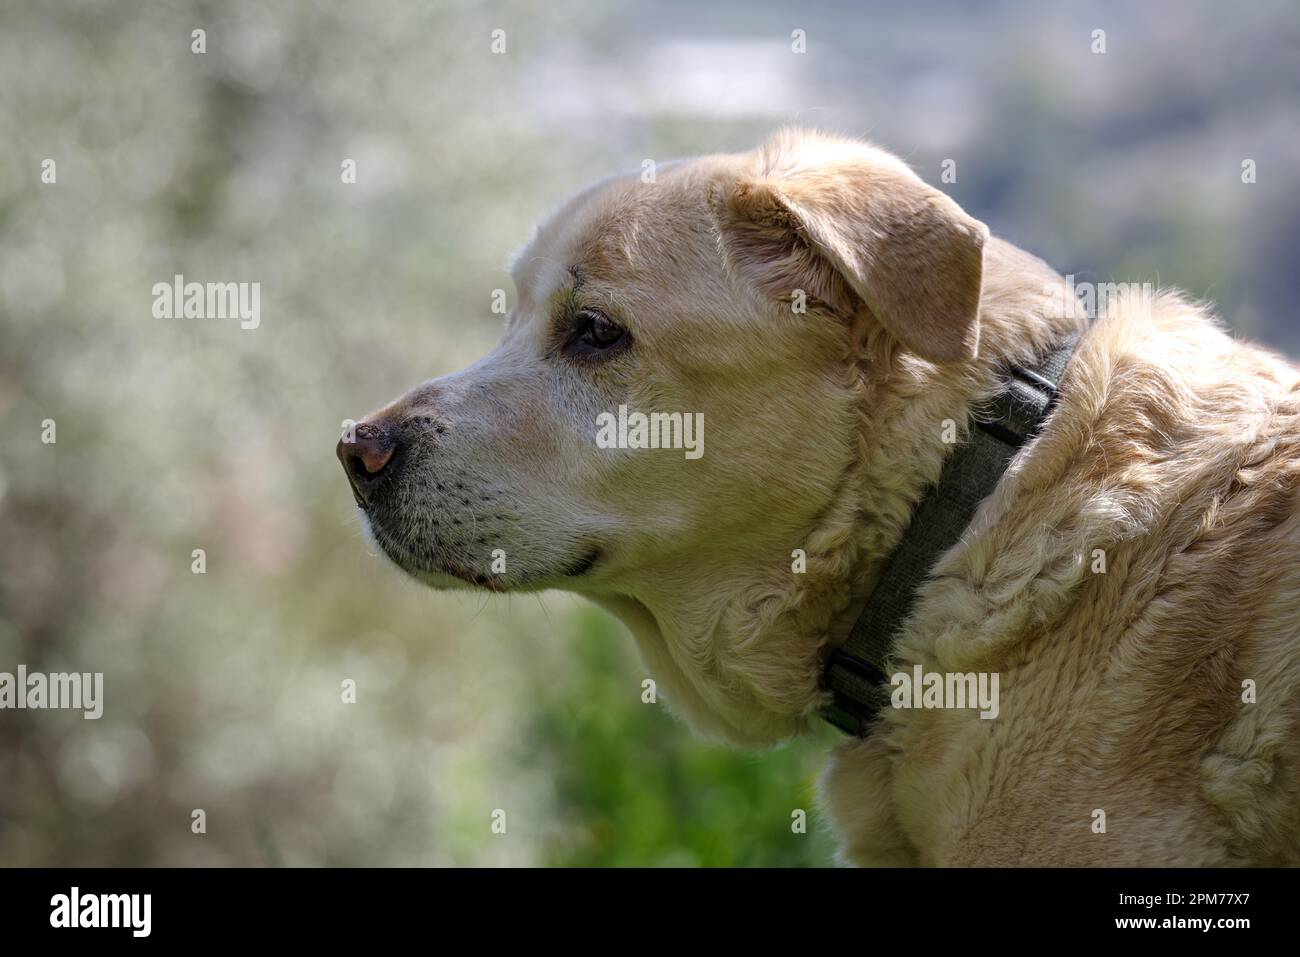 An elderly Labrador Retriever 13 years old standing and looking away Stock Photo